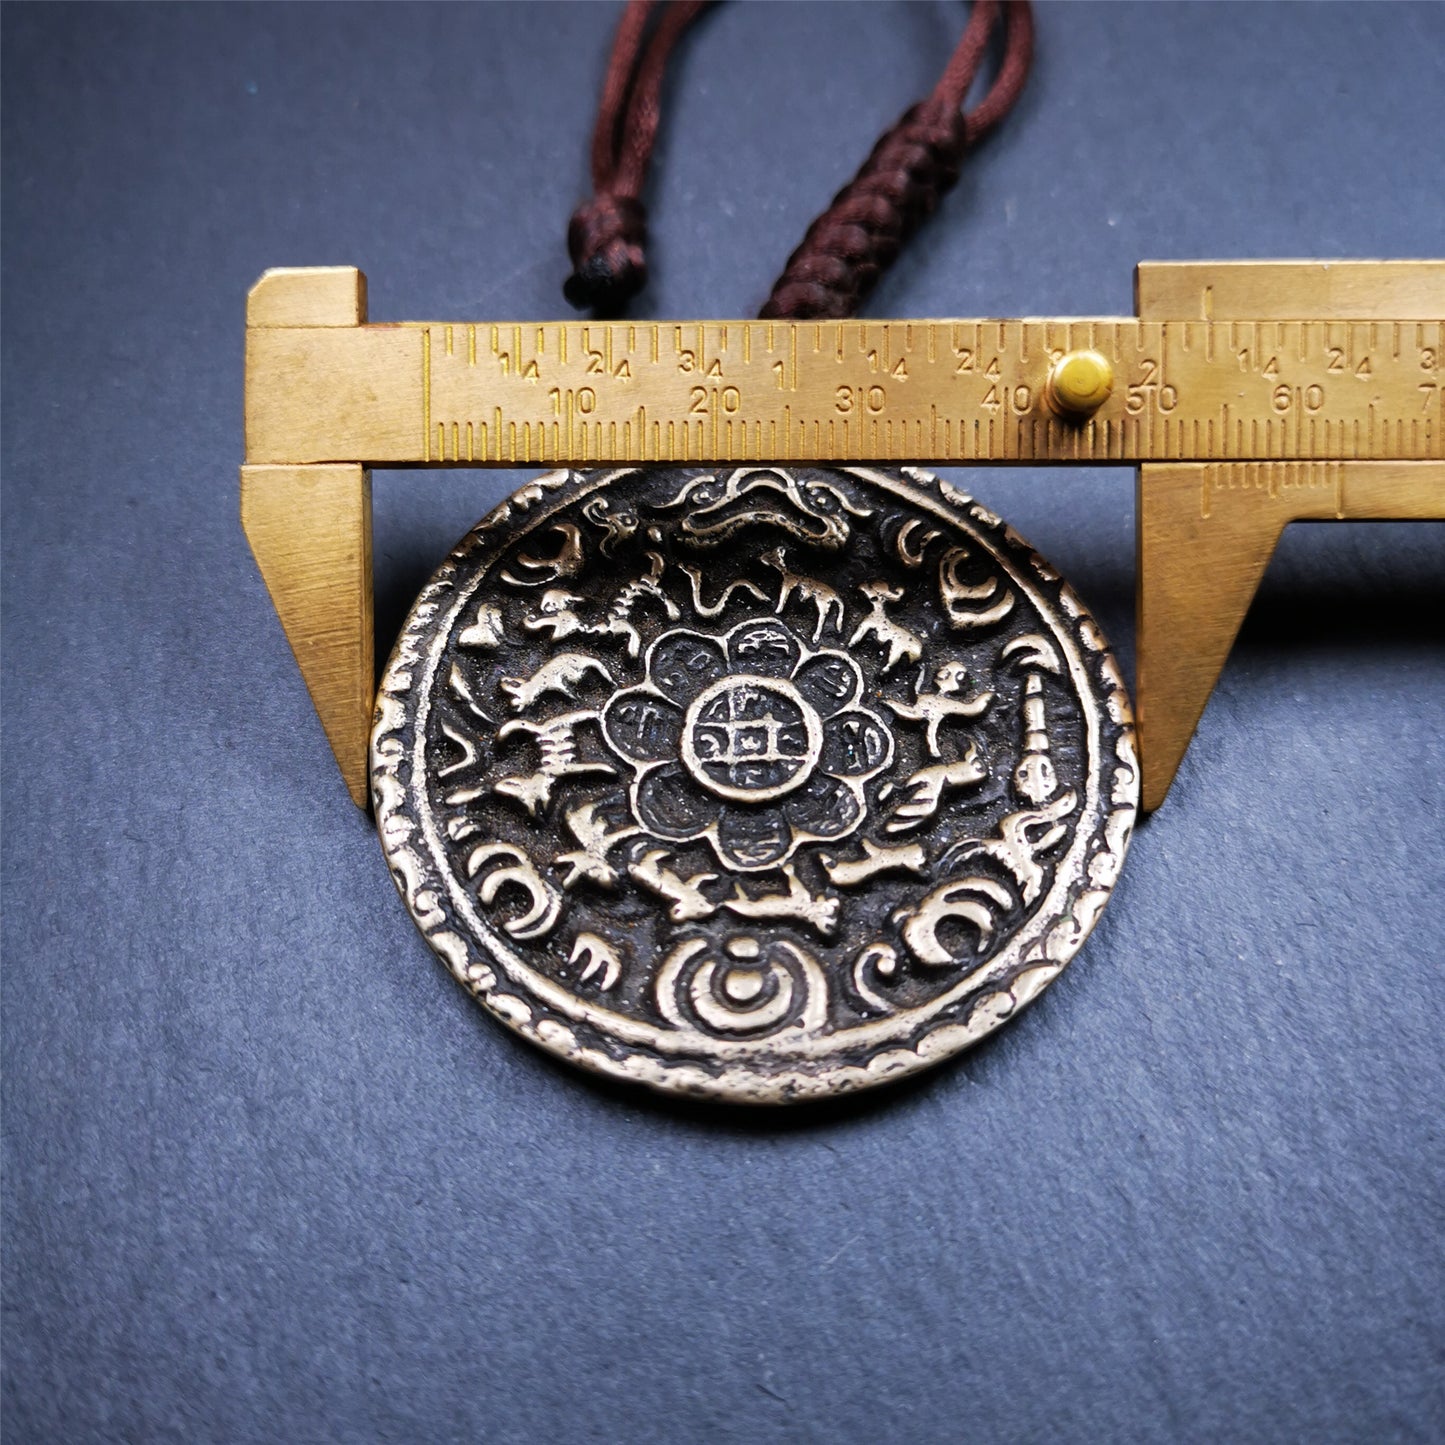 This unique Melong badge was collect from Kathok Monastery Tibet,about 60+ years old.It was sacred  amulets used by Kathok Monastery to present to believers,during a grand Dharma gathering,consecrated and blessed by lama.  It is made of thokcha,2.16 inch diameter,the front pattern is Tibetan Budhist calendar symbol - SIPAHO.